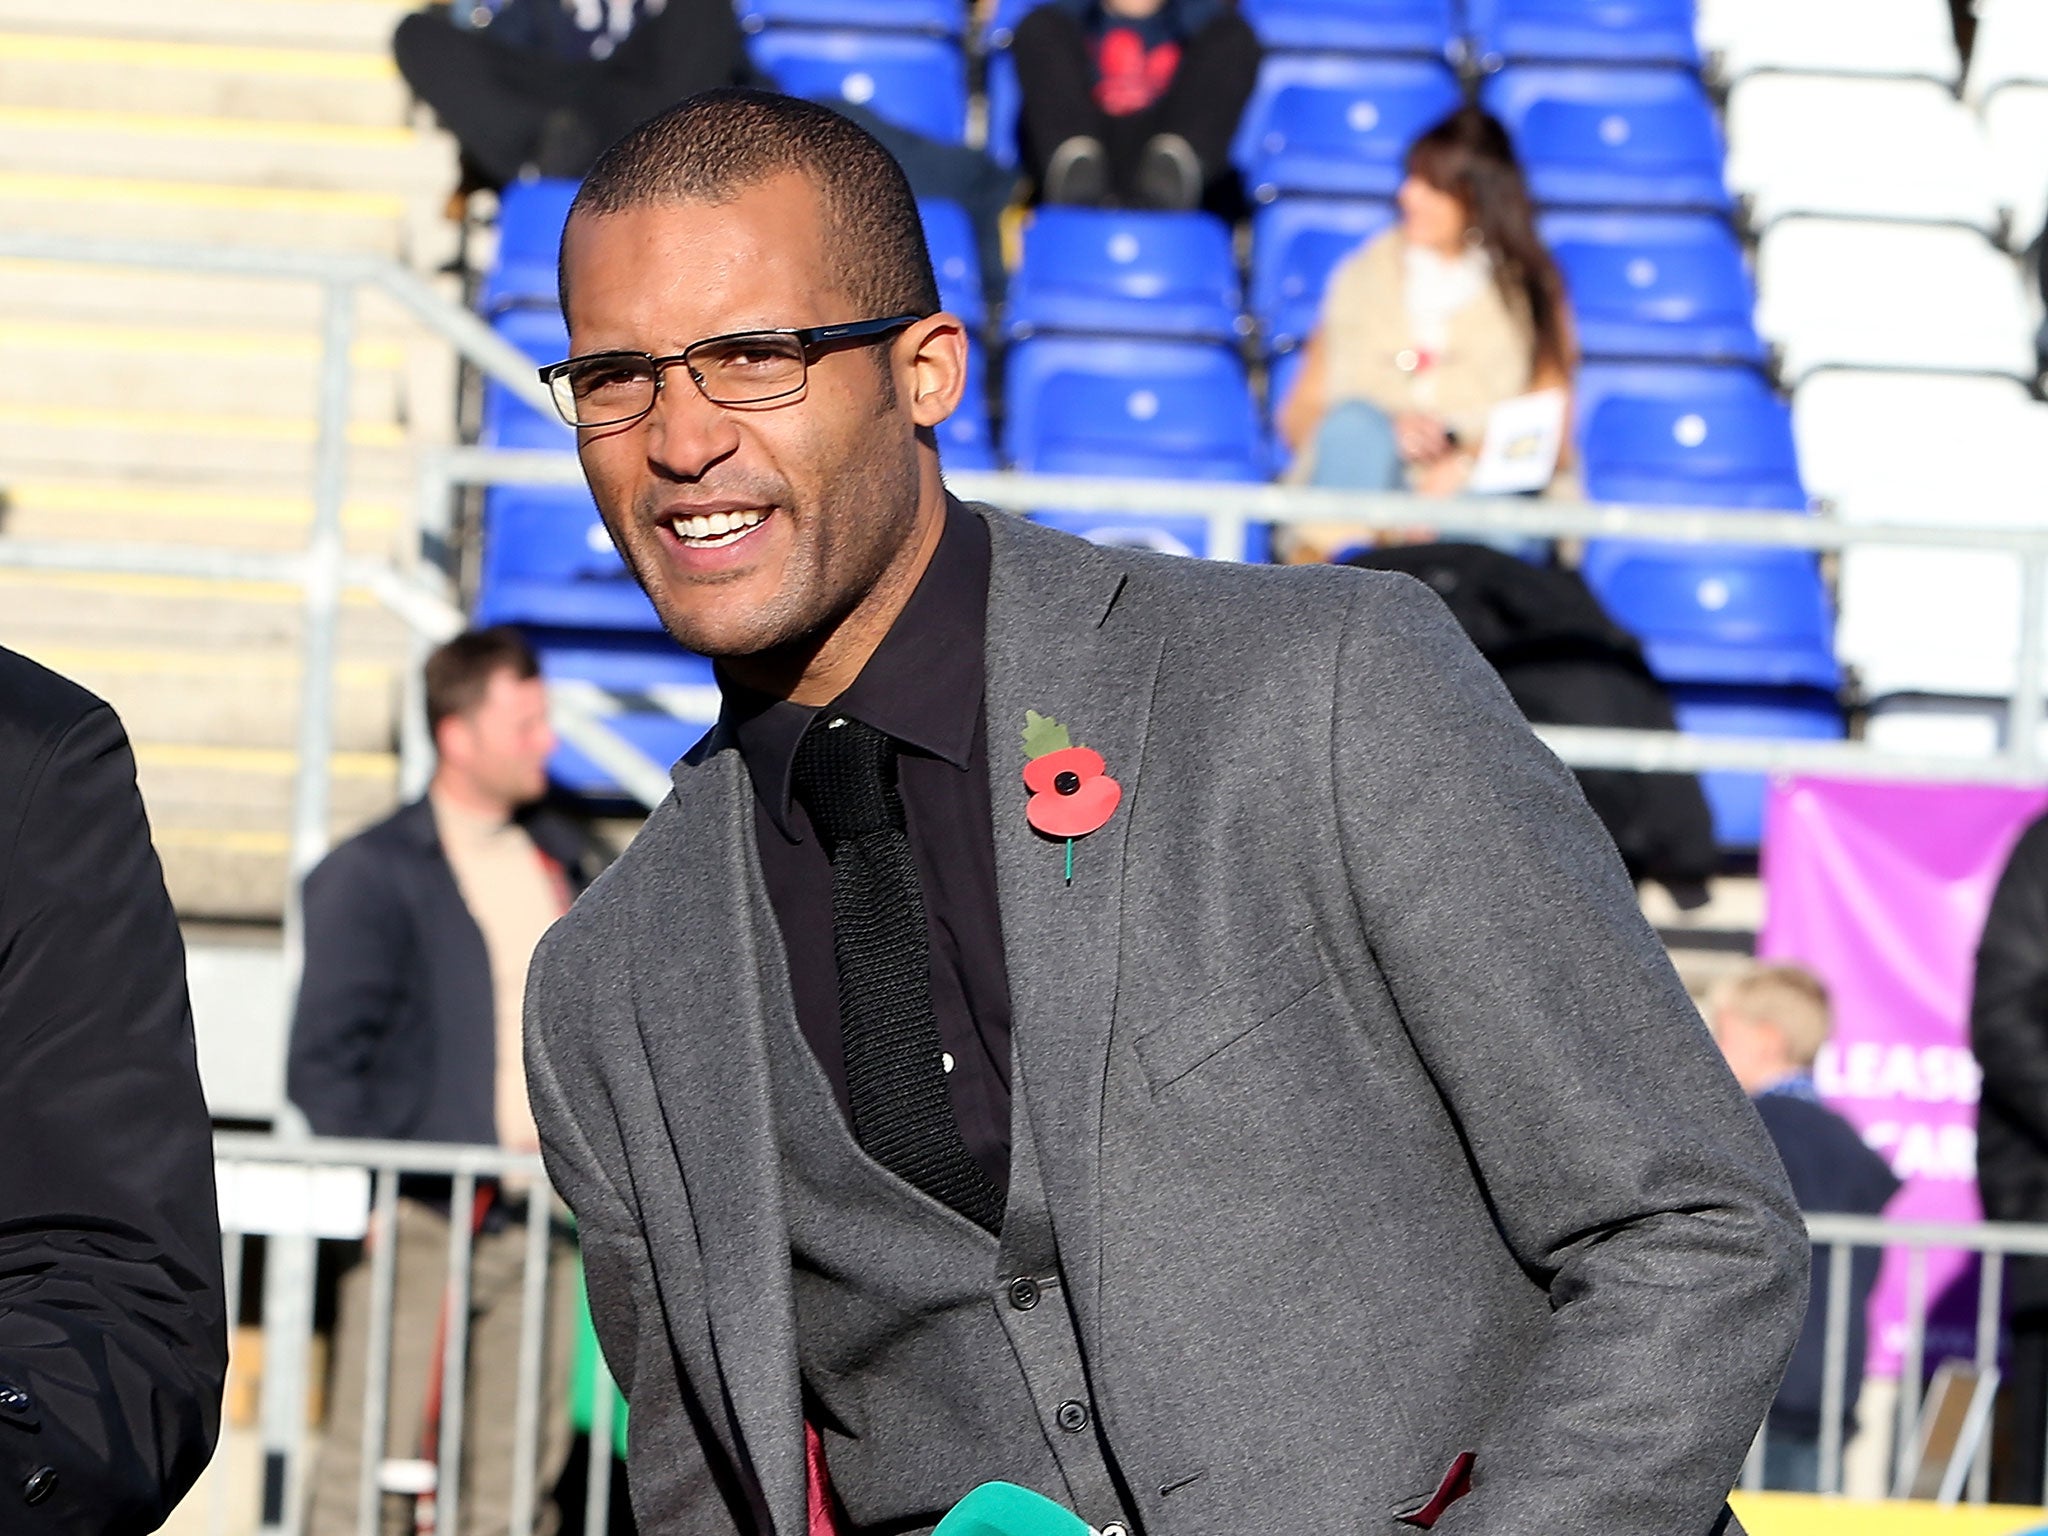 Carlisle has worked as a TV pundit since his retirement